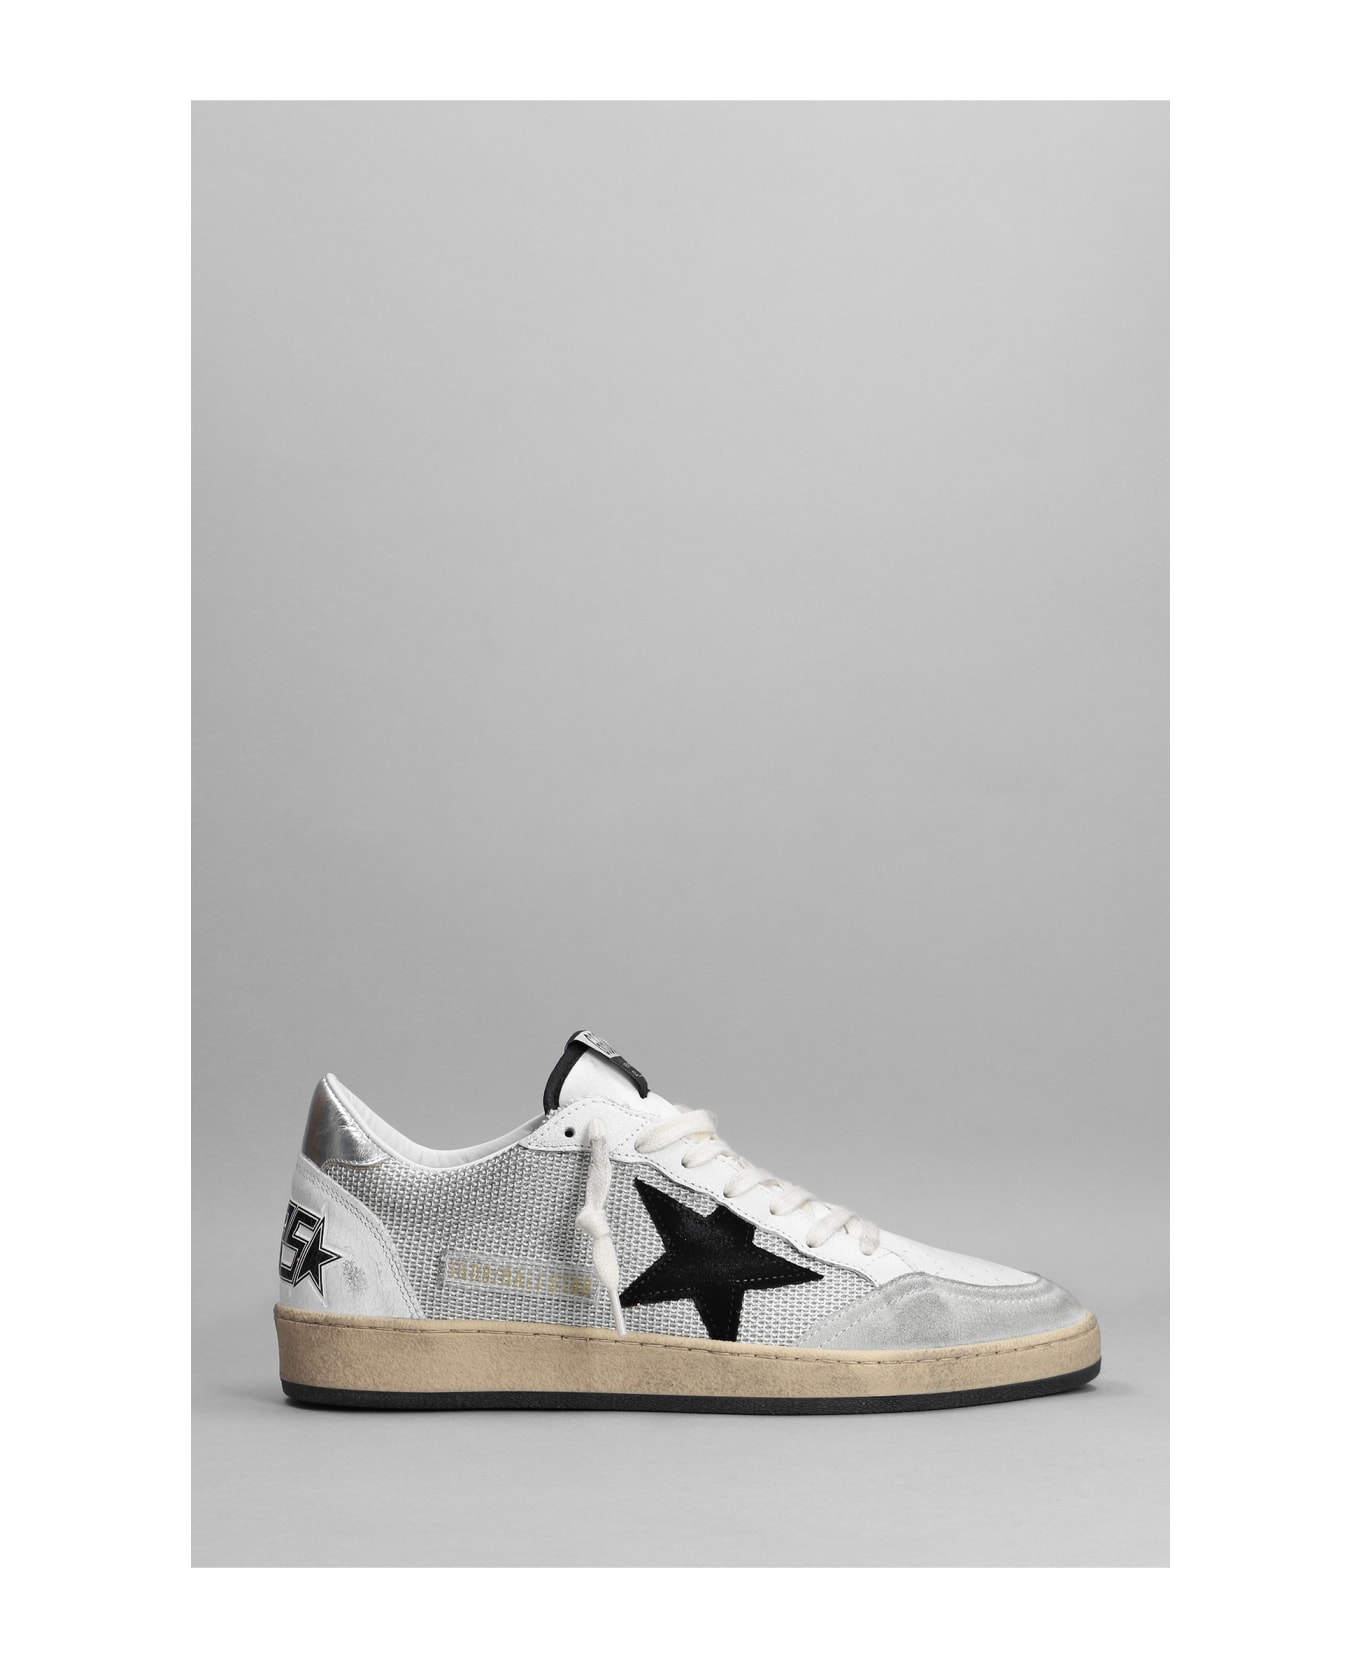 Golden Goose Ball Star Sneakers In White Leather And Fabric - Light silver/black/white/silve